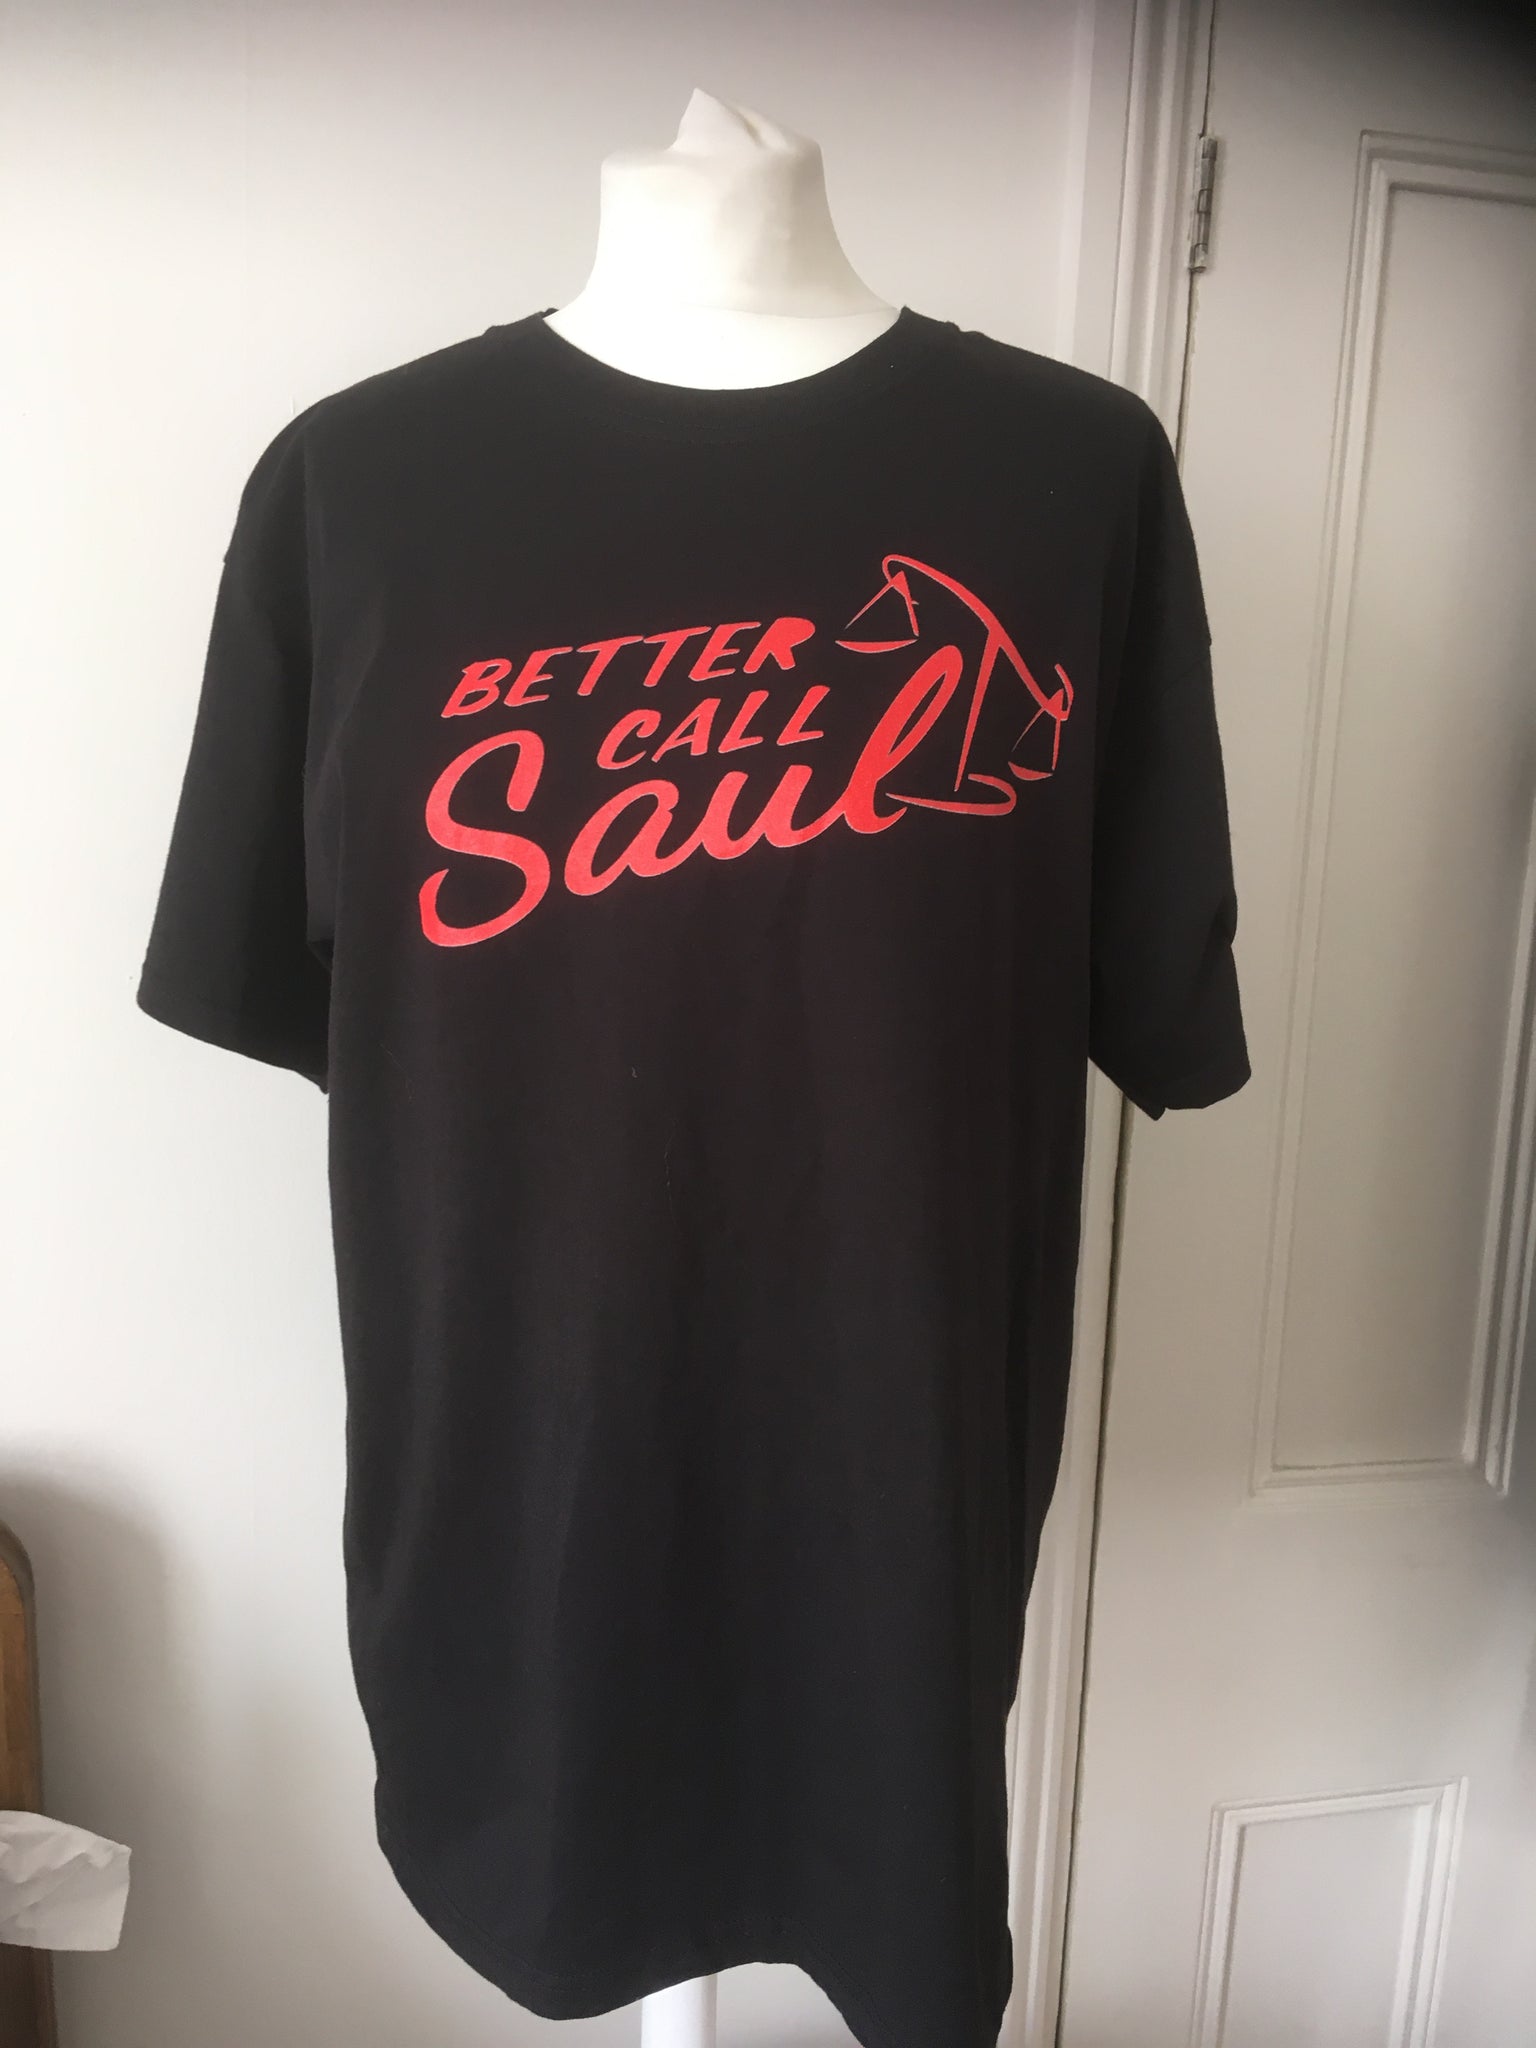 If Better Call Saul Merchandise Is So Dangerous, Why Do Not Statistics Present It?